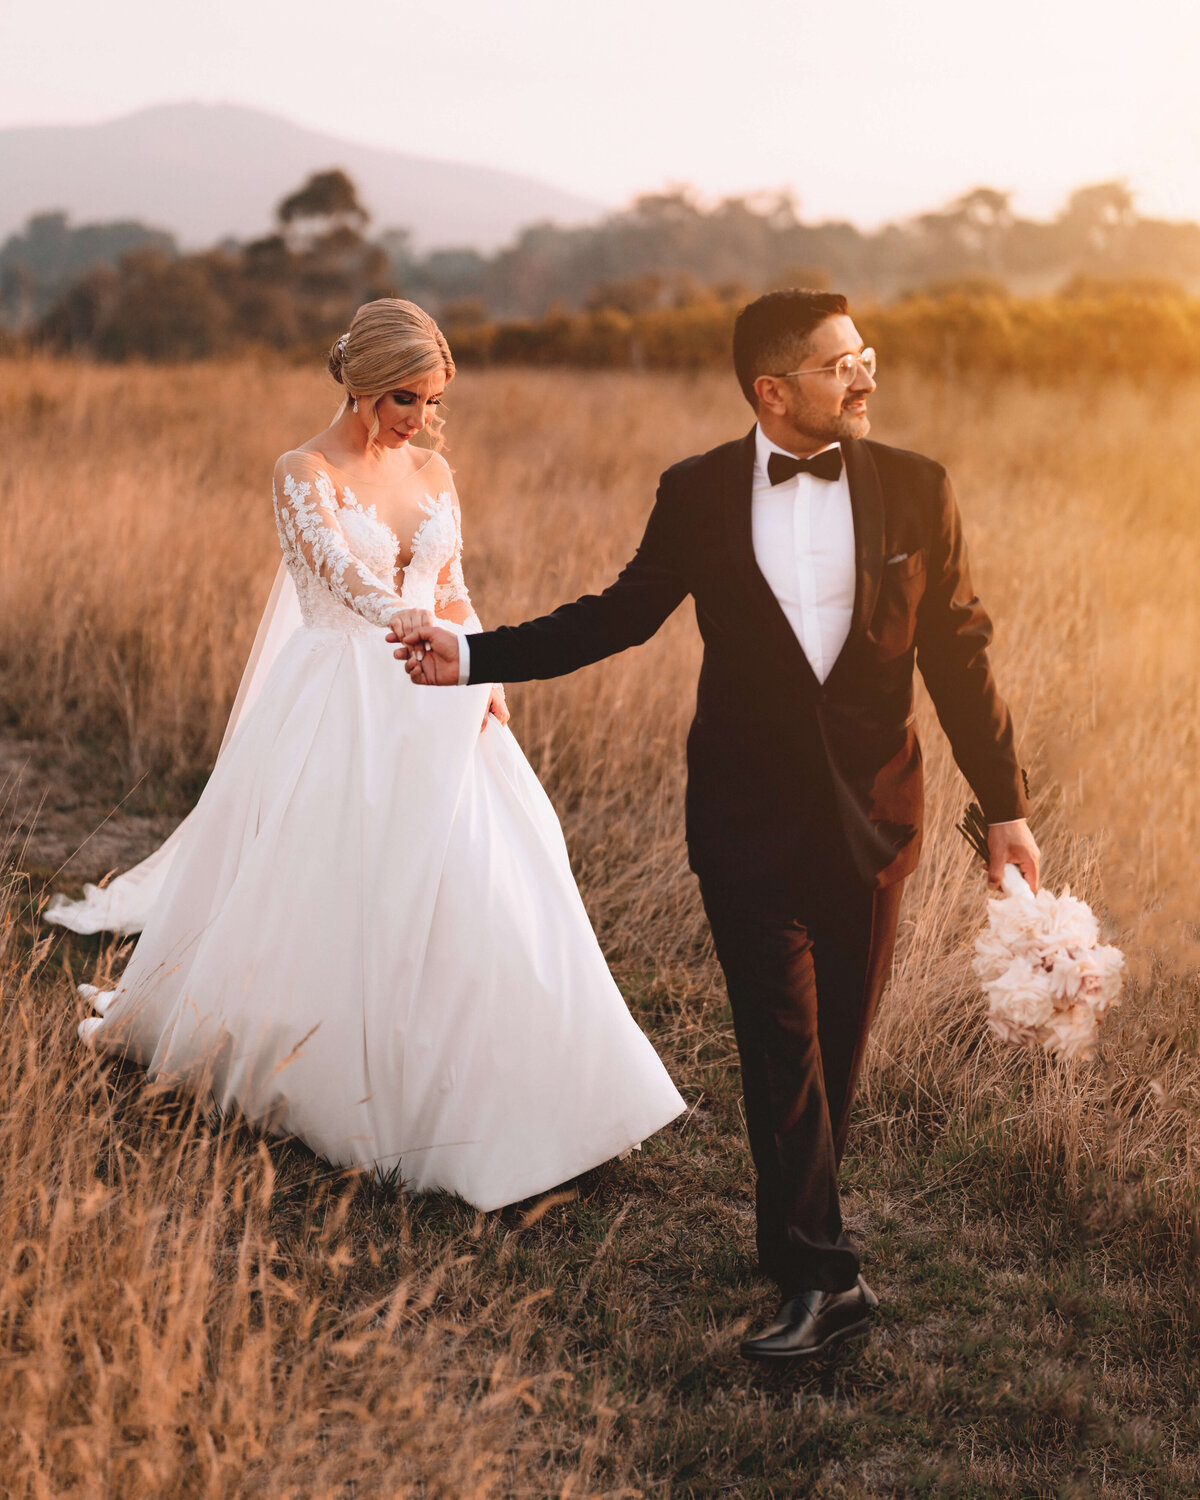 Bride and Groom walking at Sunset